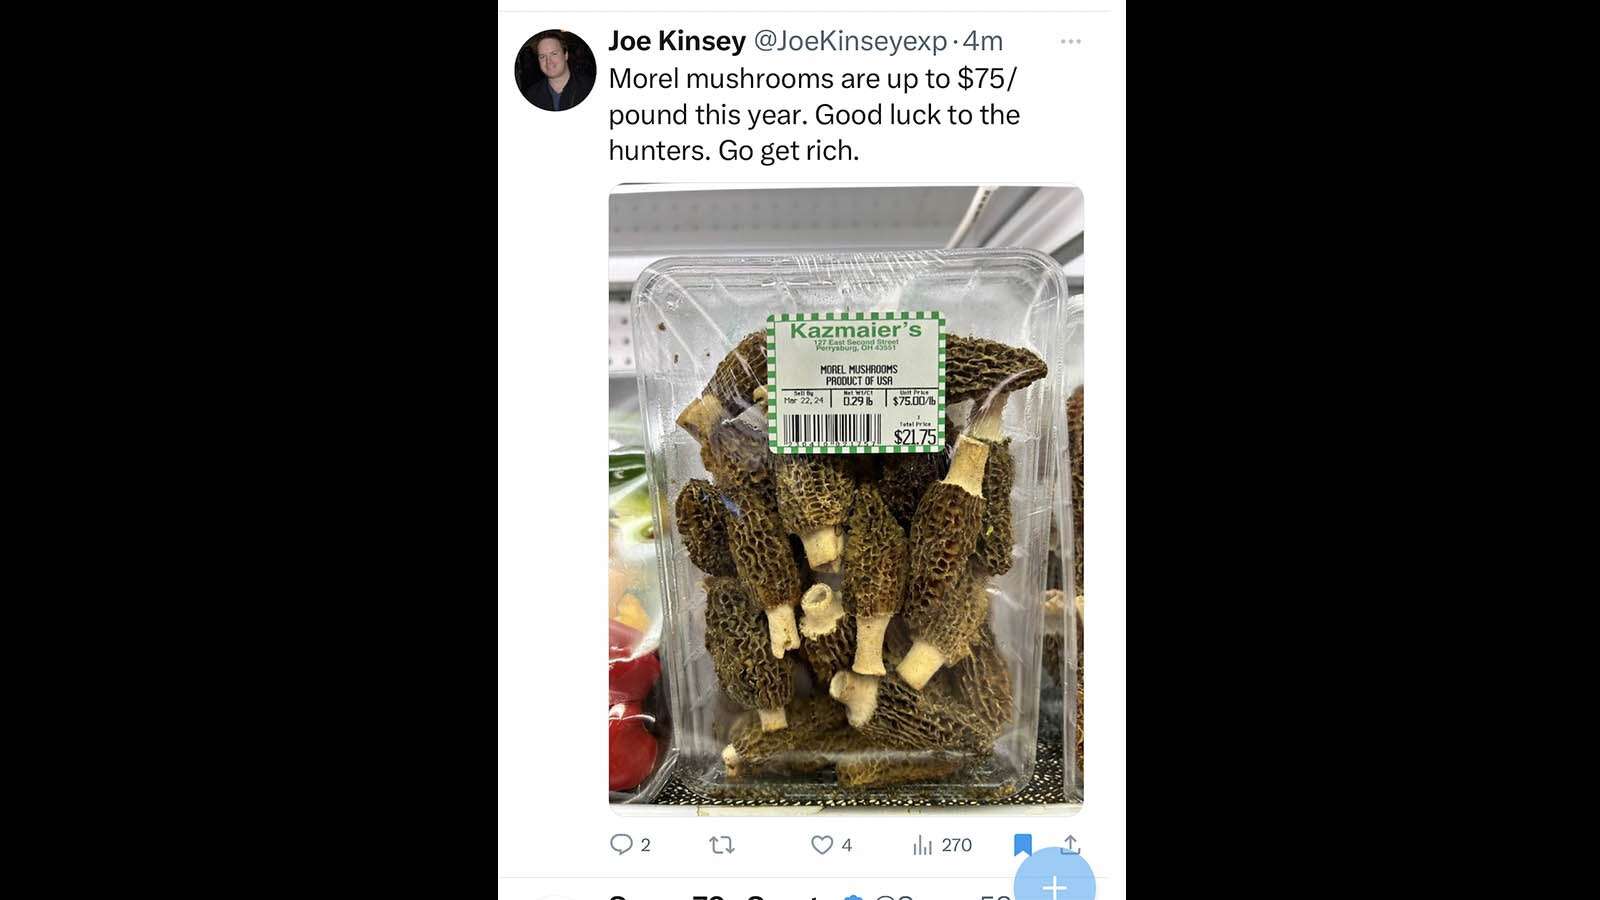 In an Ohio supermarket, morels are selling for $75 a pound.